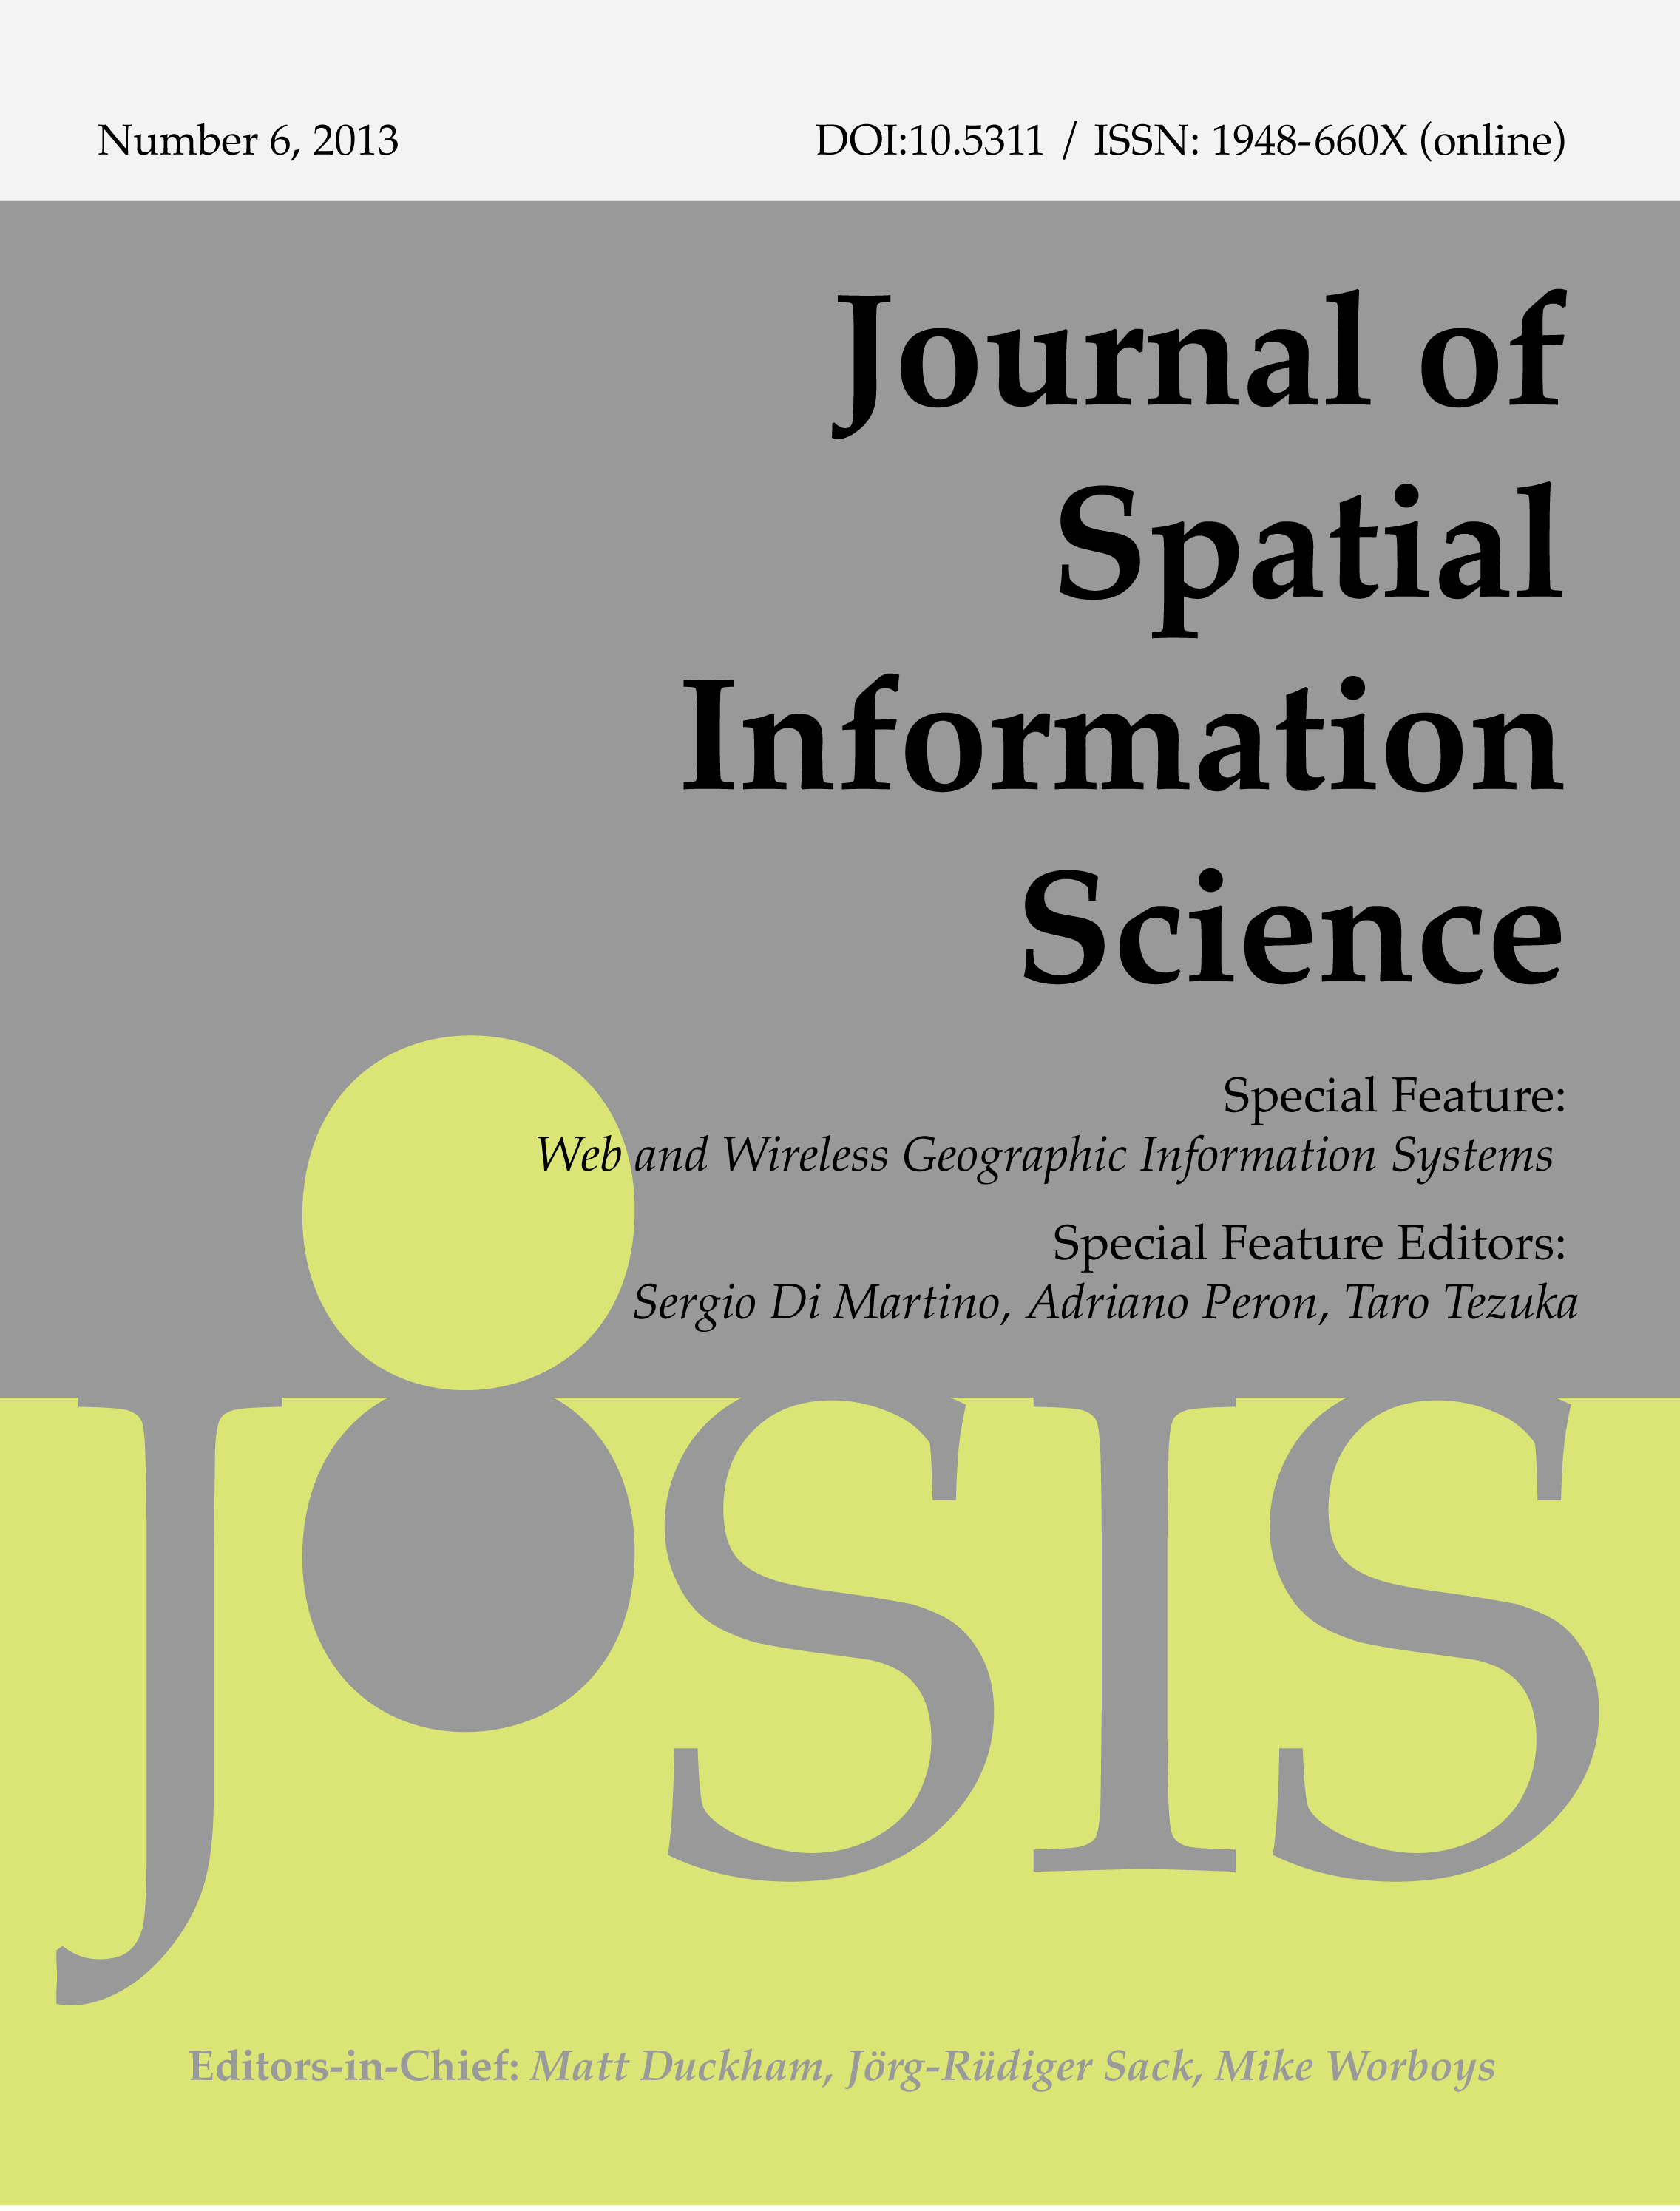 					View No. 6 (2013): Special feature on Web and Wireless Geographic Information Systems
				